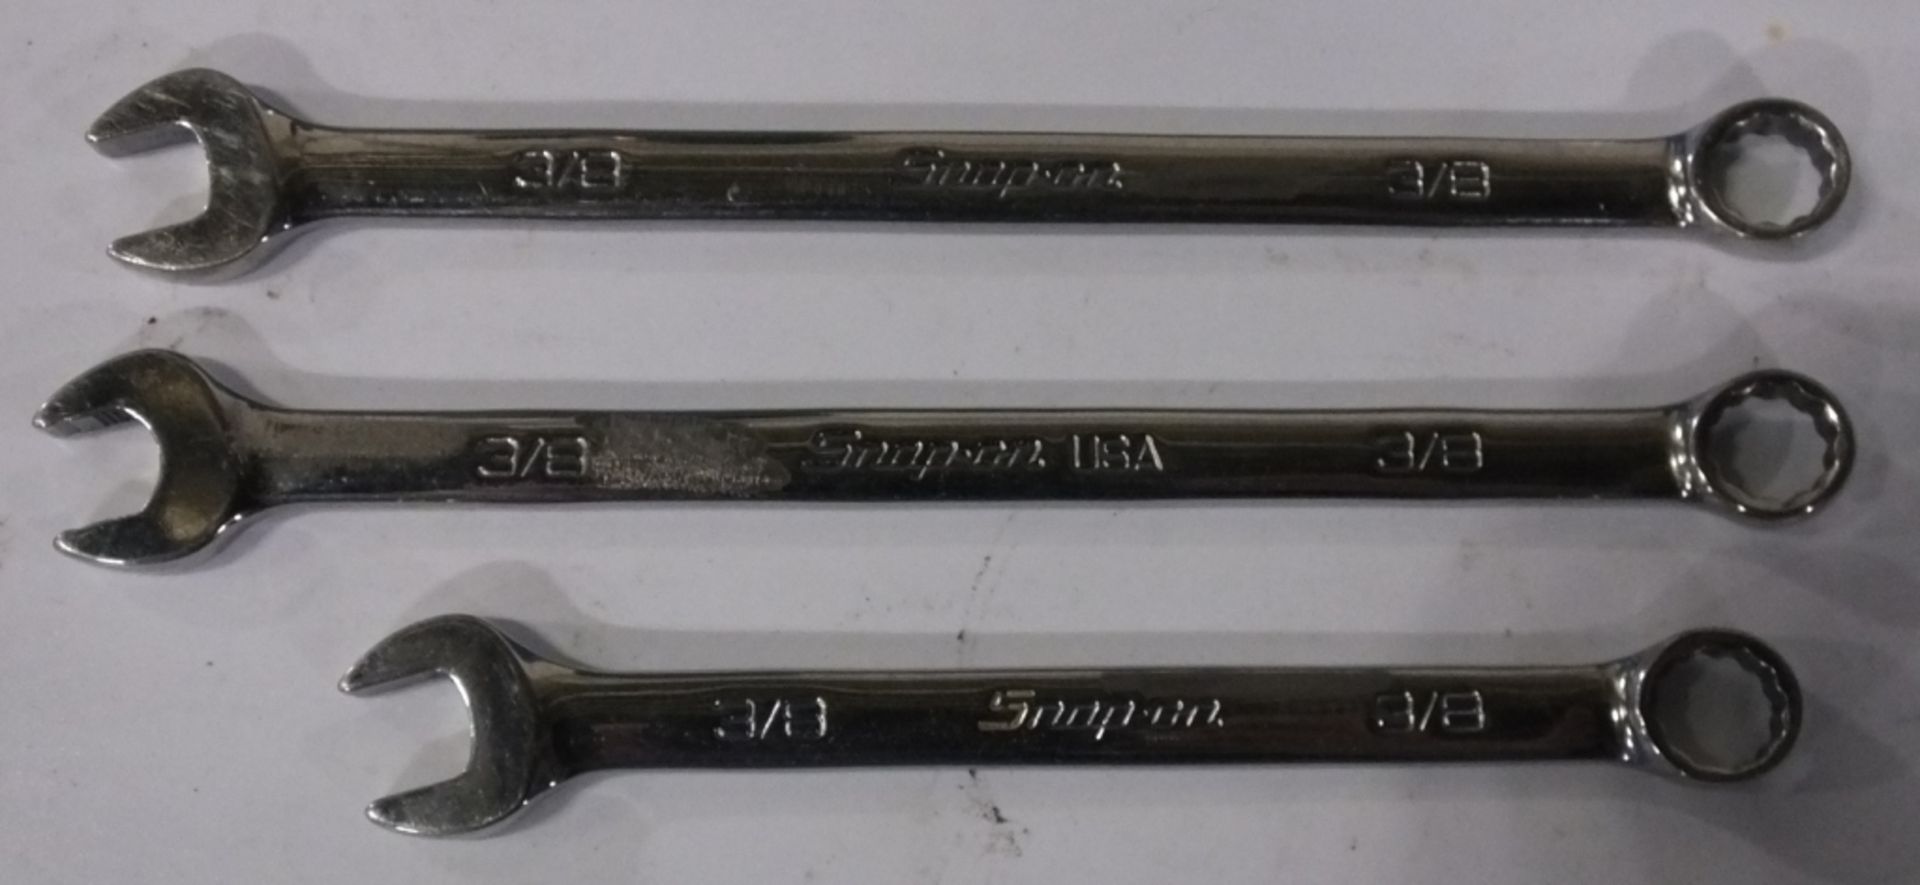 3x Snap-On combination spanners - 3/8